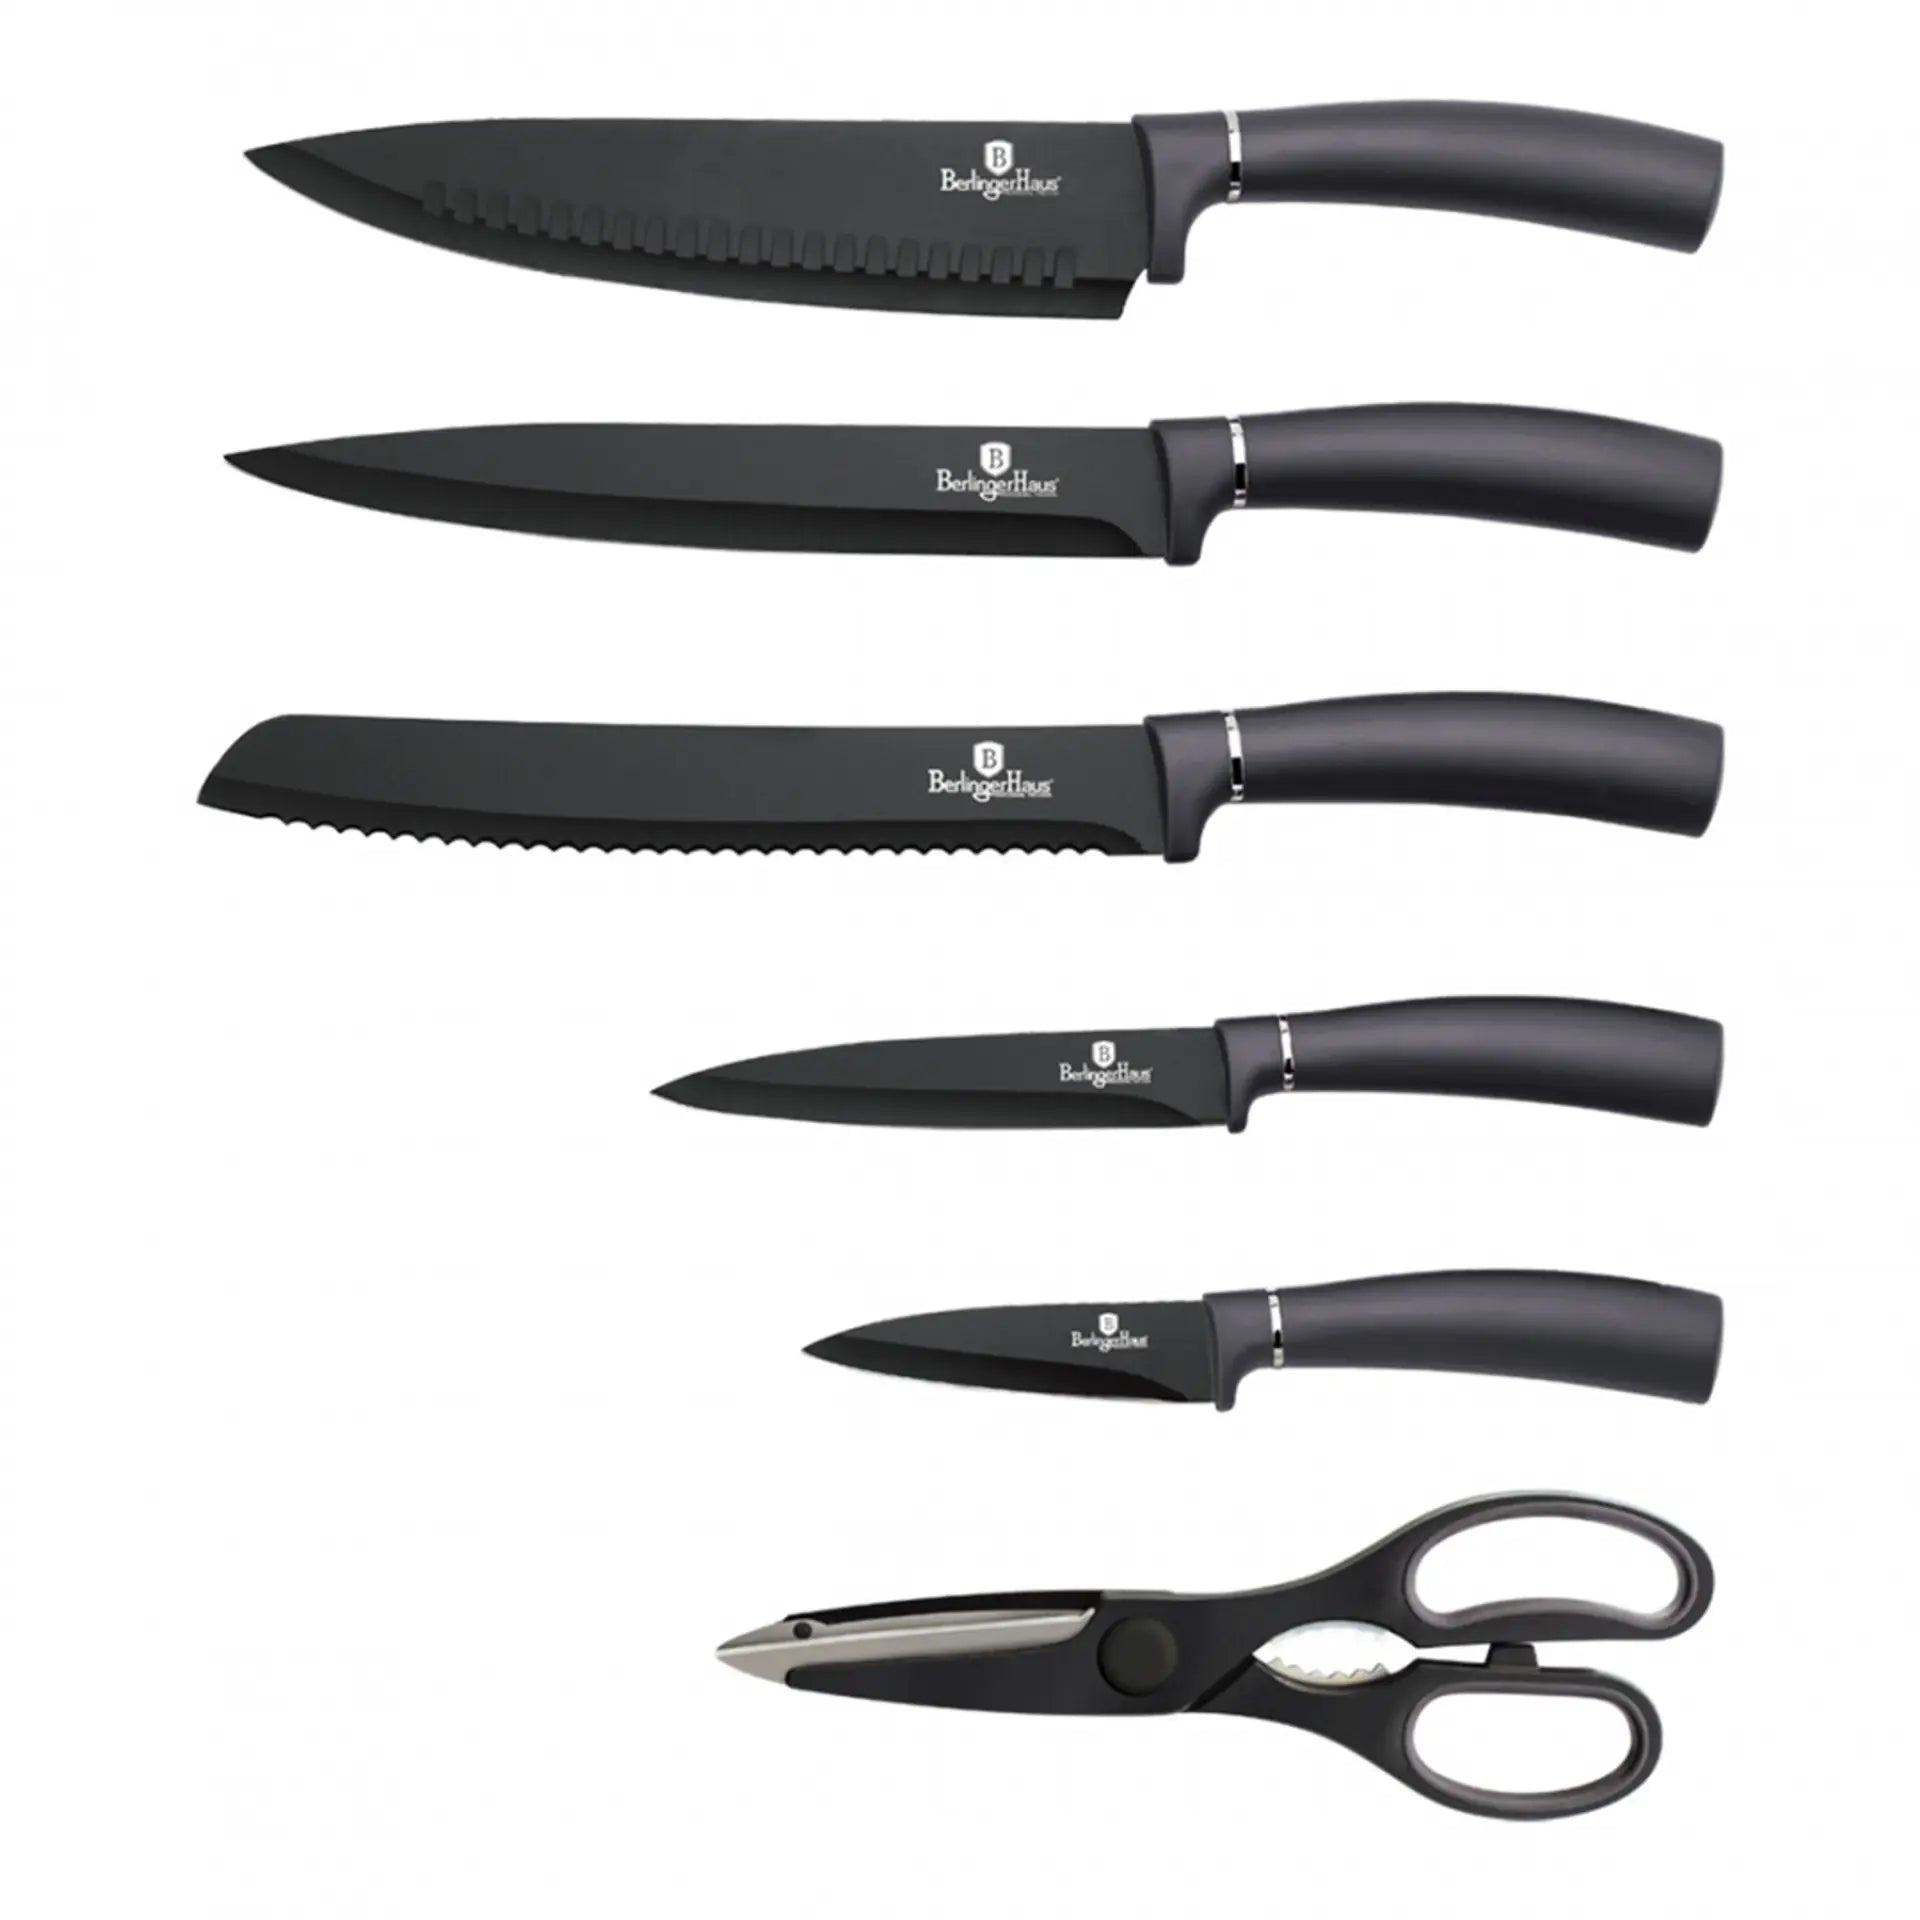 Berlinger Haus 7 pcs Knife set with stand - Carbon pro edition